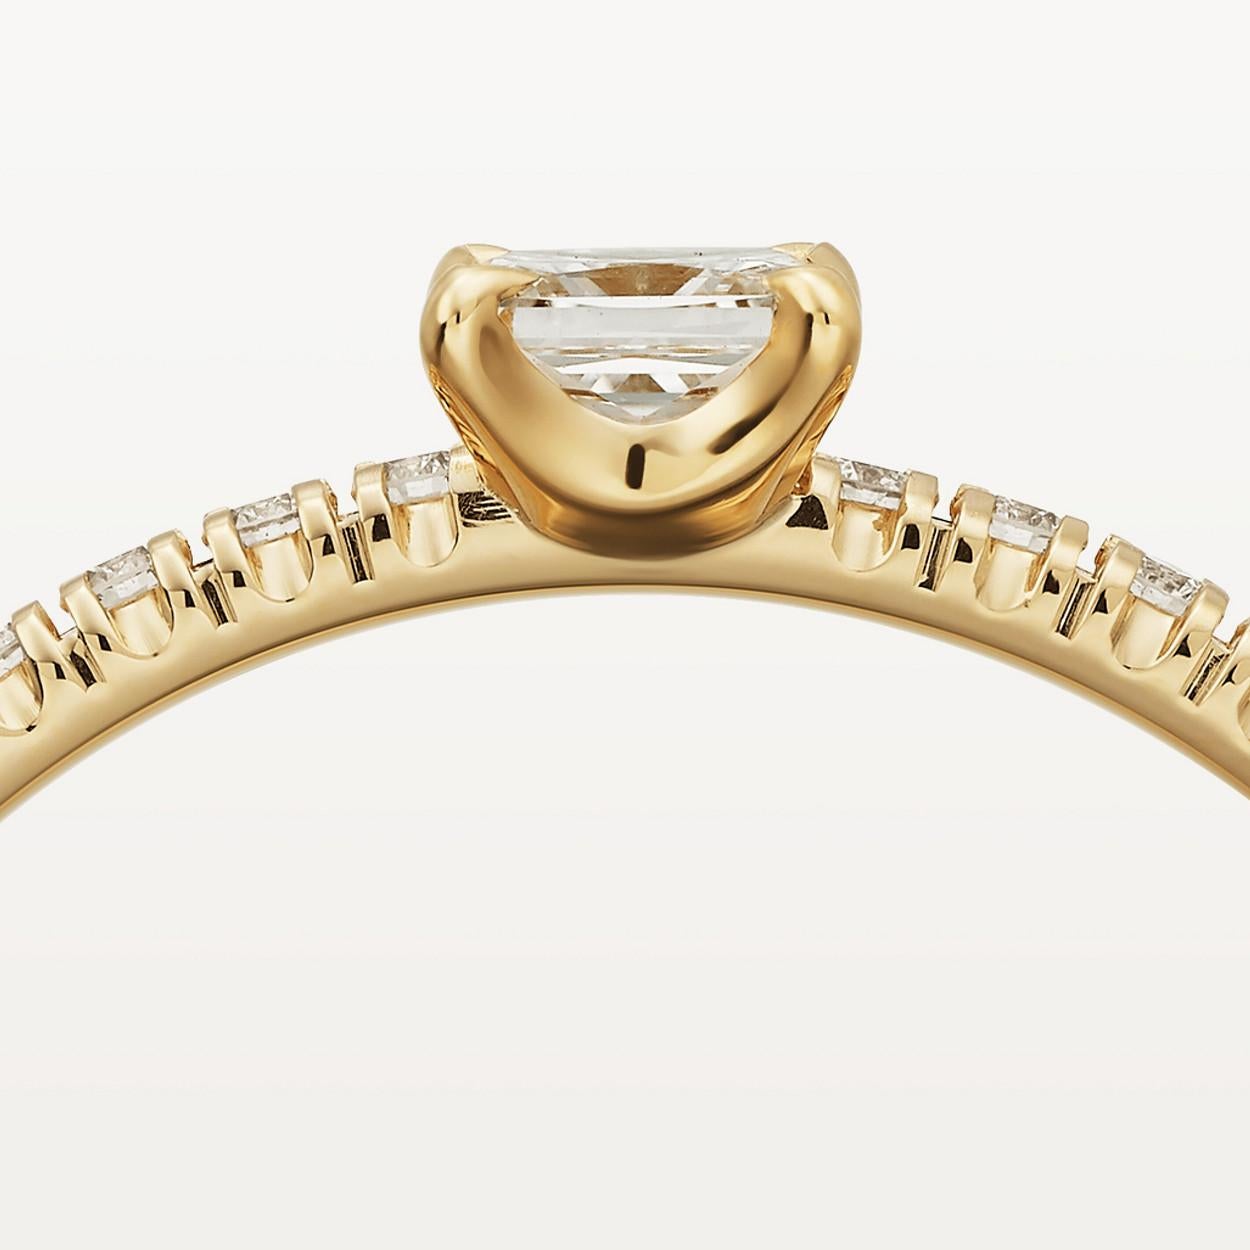 Cartier 18k Yellow Gold & Diamond Engagement Ring w/Box & Papers Etincelle


Here is your chance to purchase a beautiful and highly collectible designer ring.  Truly a great piece at a great price! 

Weight: 1.4 grams
Condition: Great 

Signature: